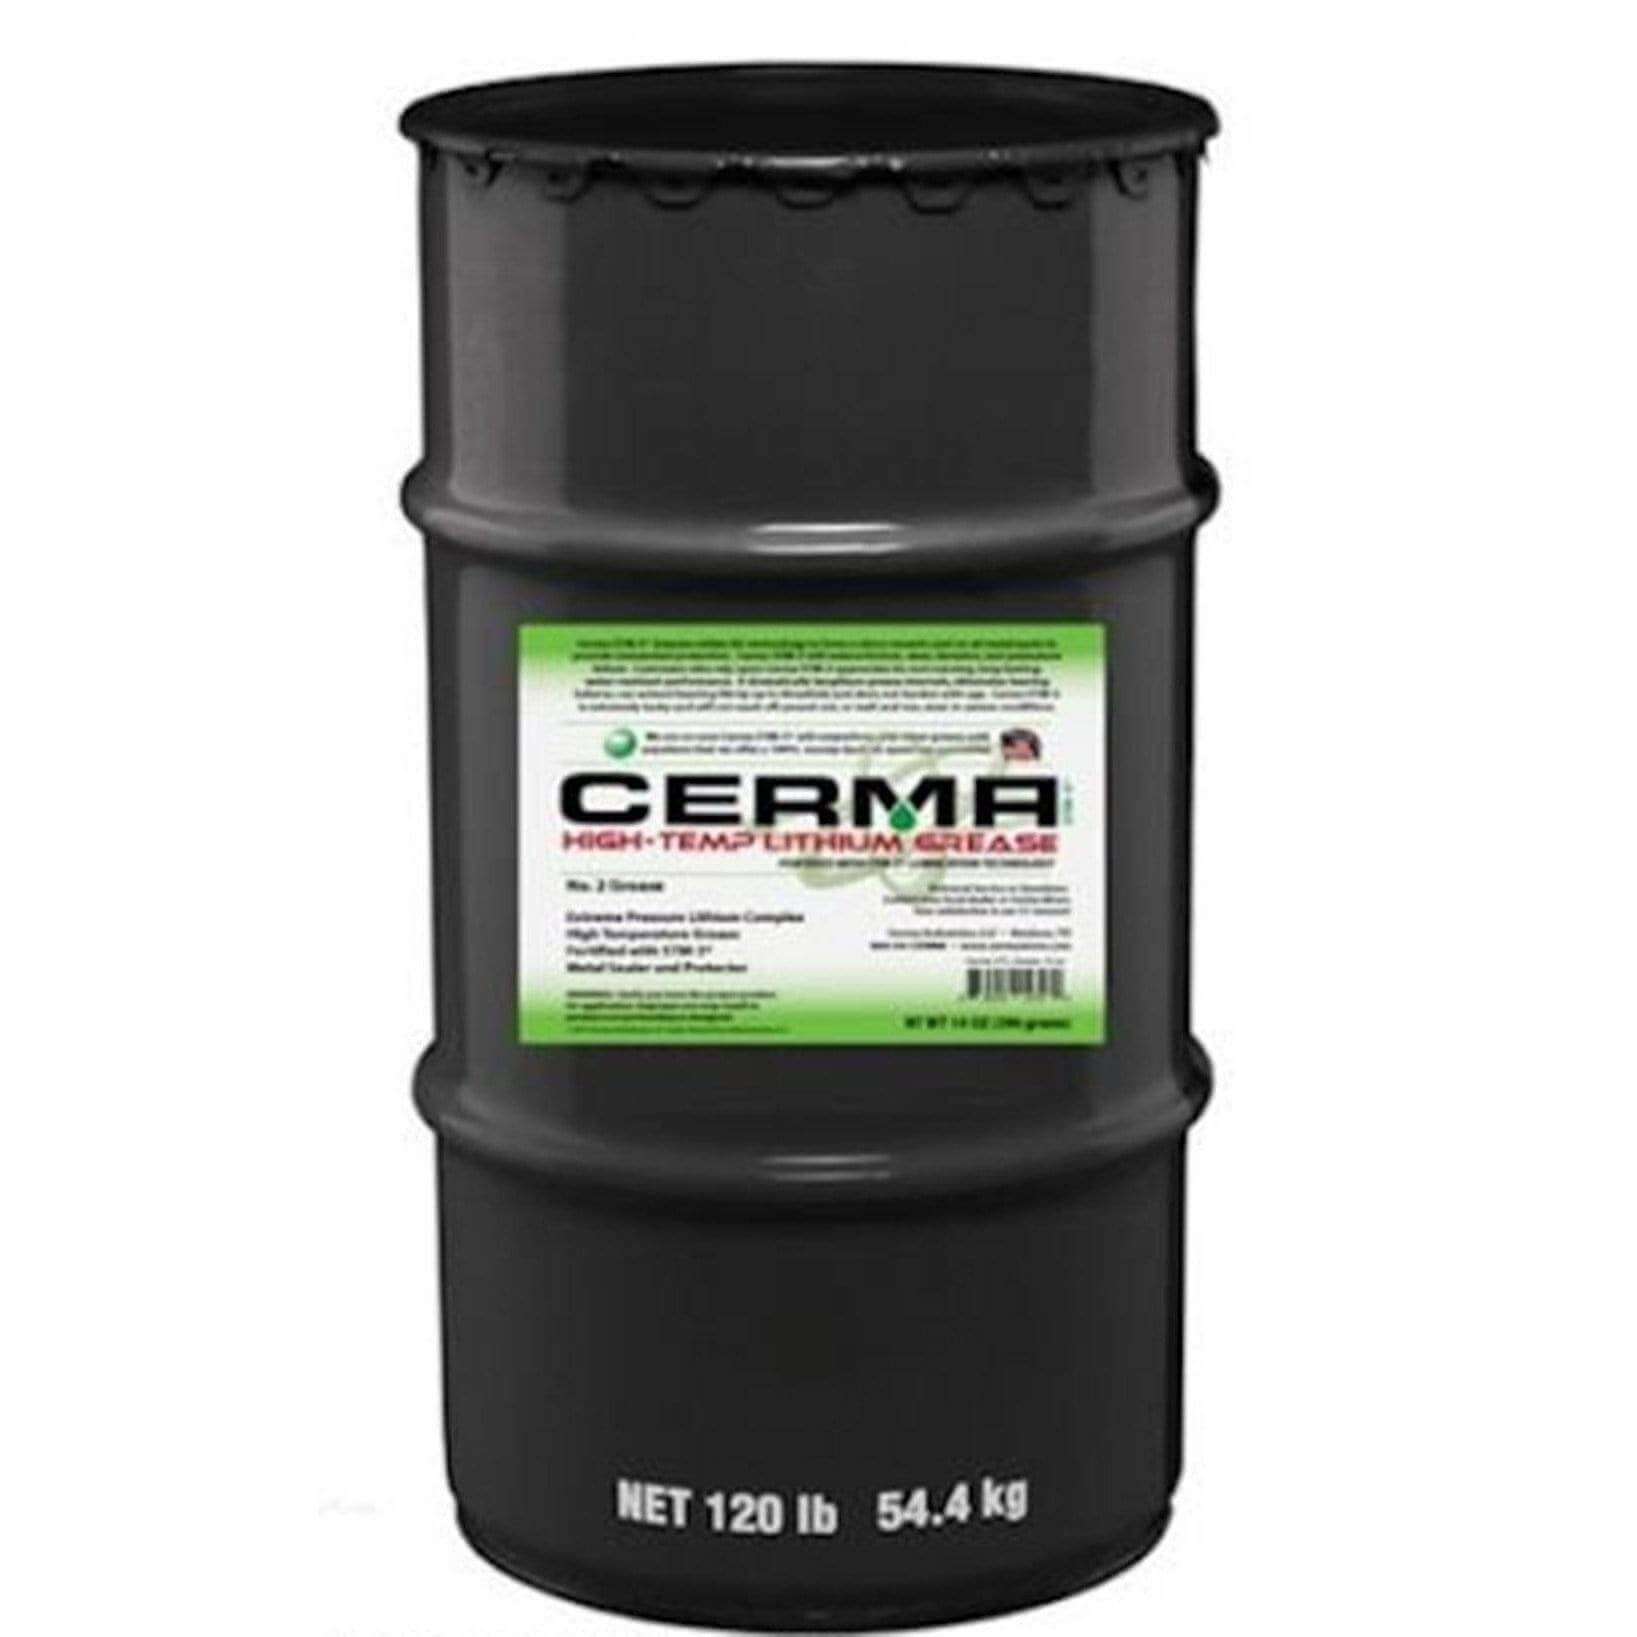 Cerma Hi Temperature Lithium Grease at $1284.03 only from cermatreatment.com